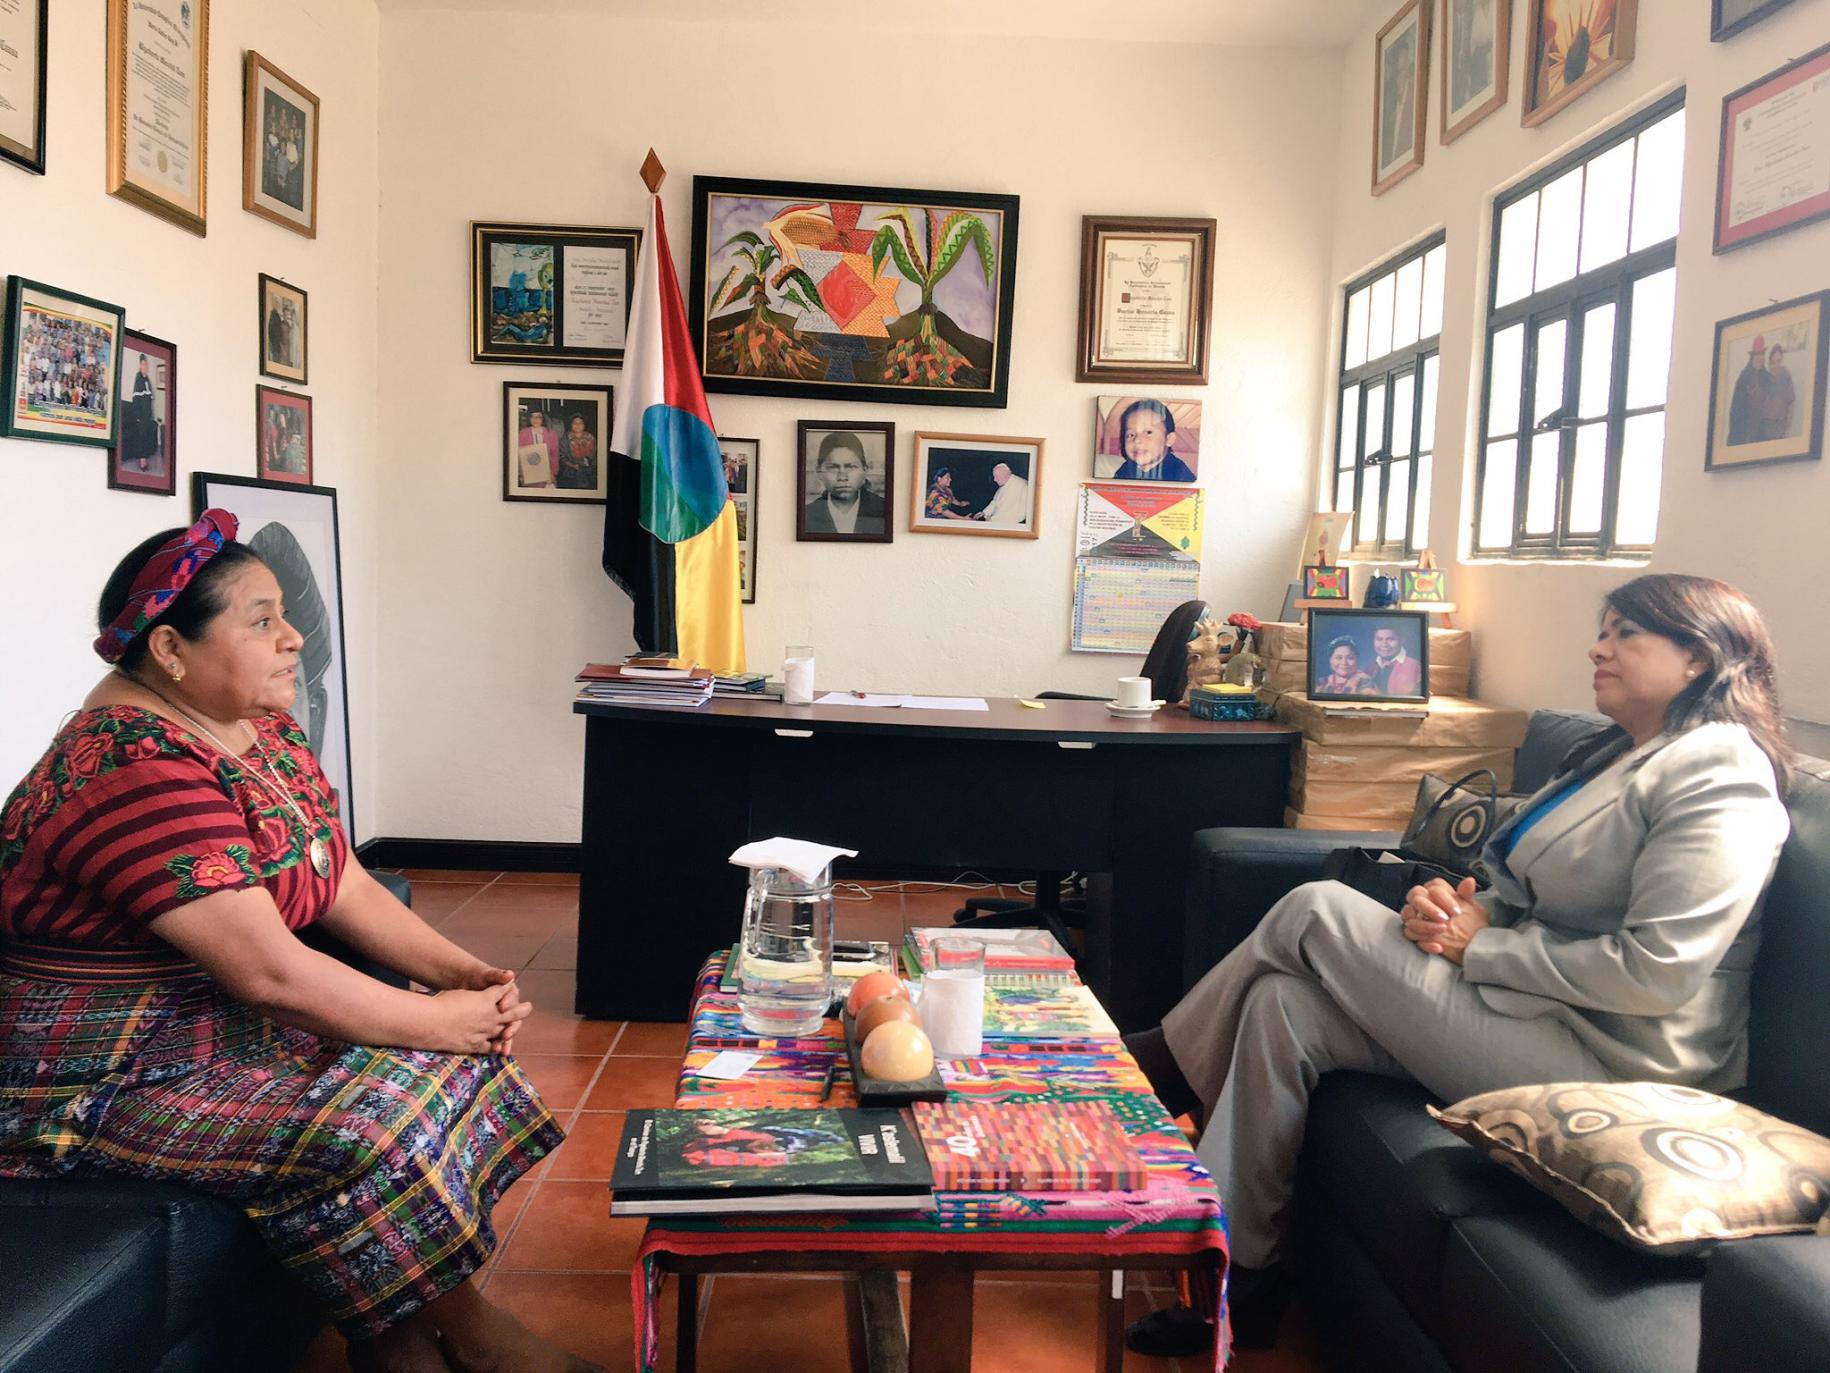 The author, Rebeca Árias, is seen here visiting Rigoberta Menchú Tum a Noble Peace Prize laureate and an advocate of the rights of indigenous people